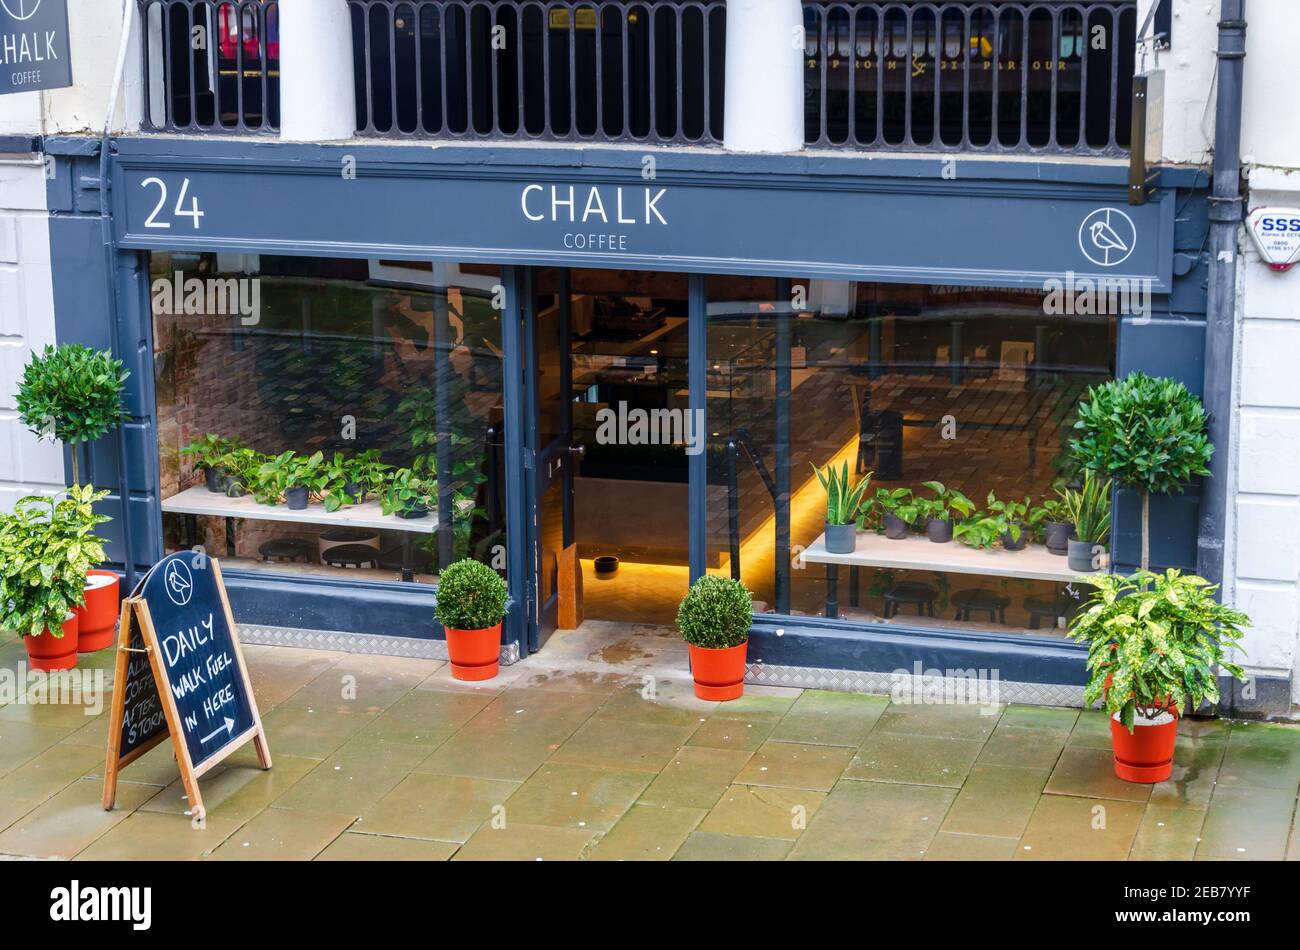 Chester; UK: Jan 29, 2021: Chalk Coffee on Watergate Street is a speciality coffee shop which is open for take away during the pandemic lockdown Stock Photo